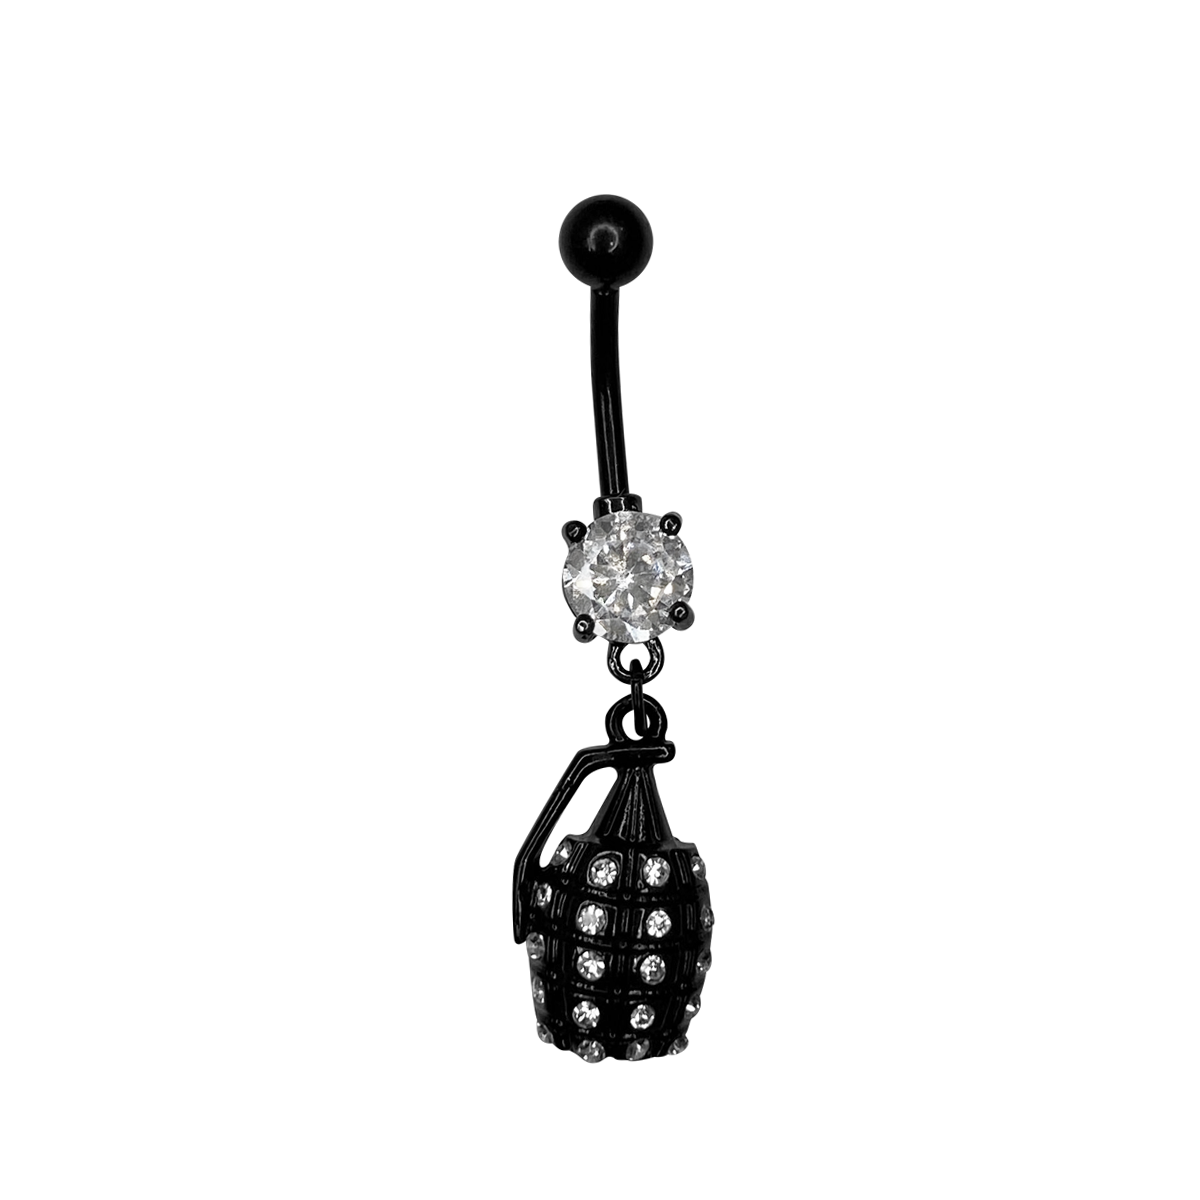 Belly Button Ring Naval piercing Surgical Steel Dangle Granat design